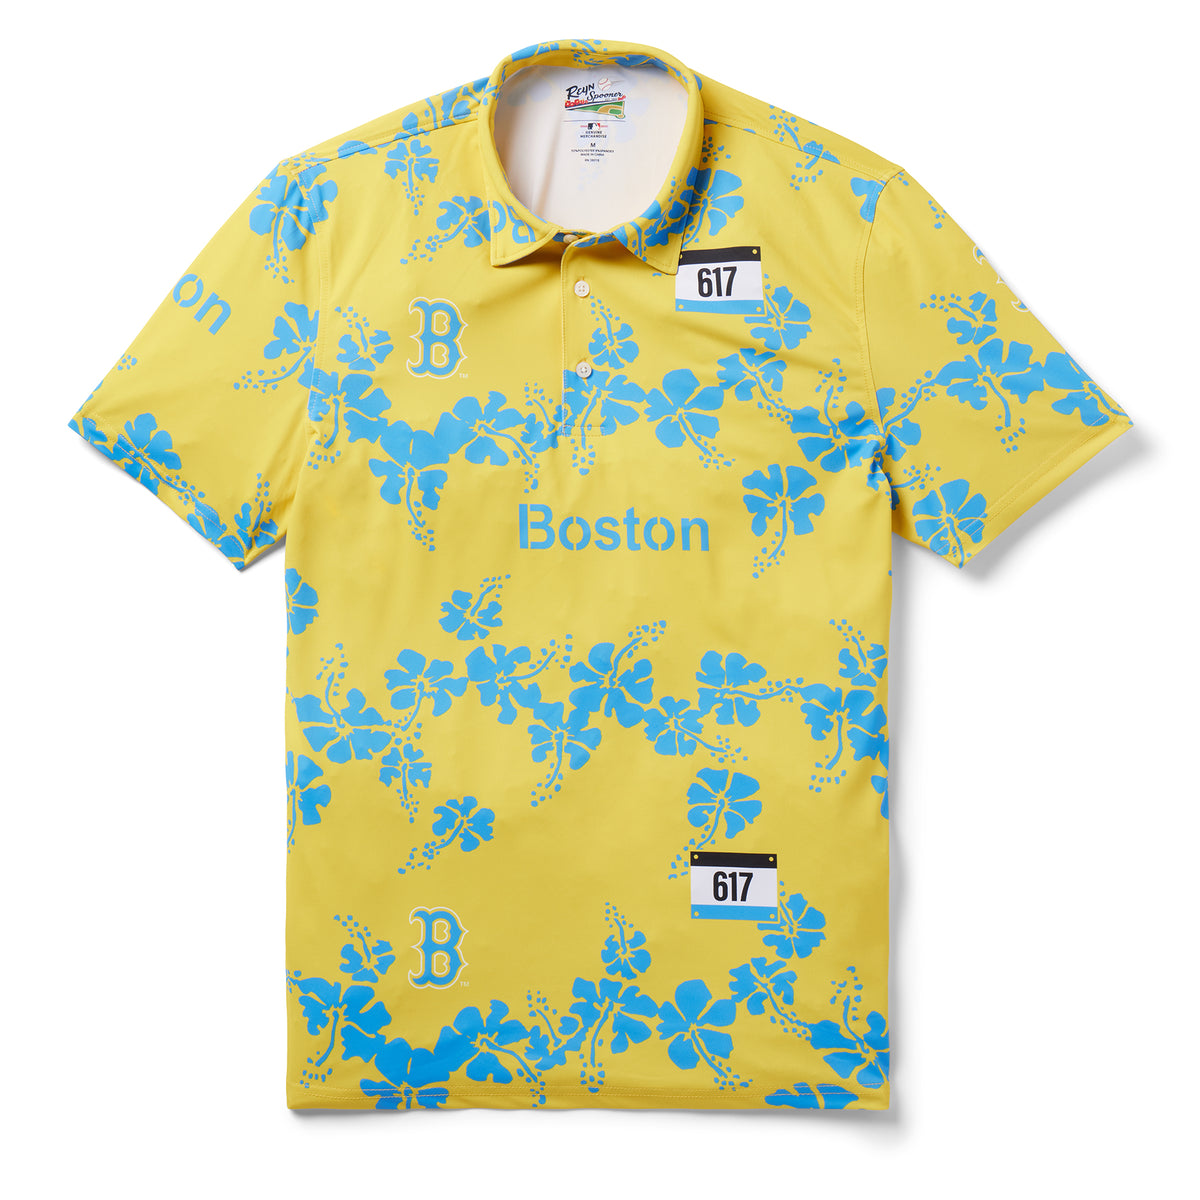 Boston Red Sox City Connect Performance Button Front / Performance Fabric Yellow / S by Reyn Spooner